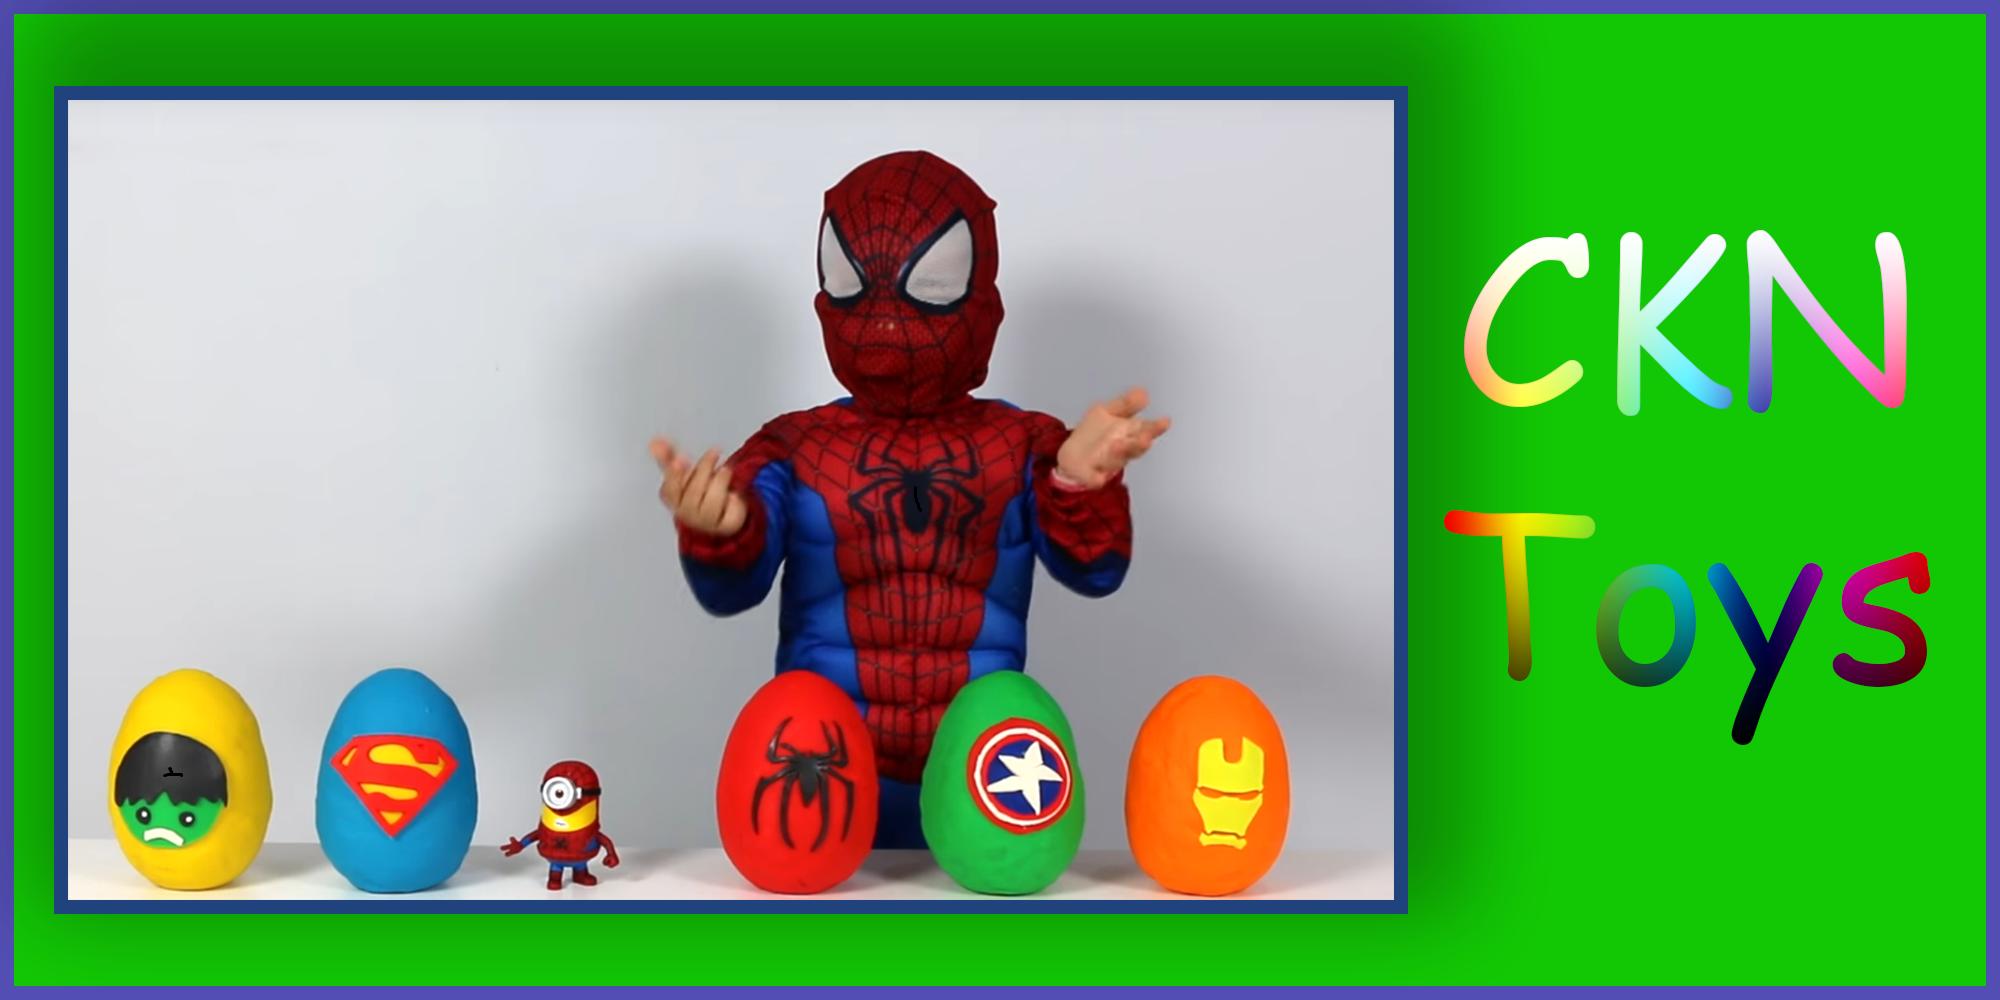 Ckn Toys For Superheroes Kids For Android Apk Download - ckn toys roblox hello neighbor